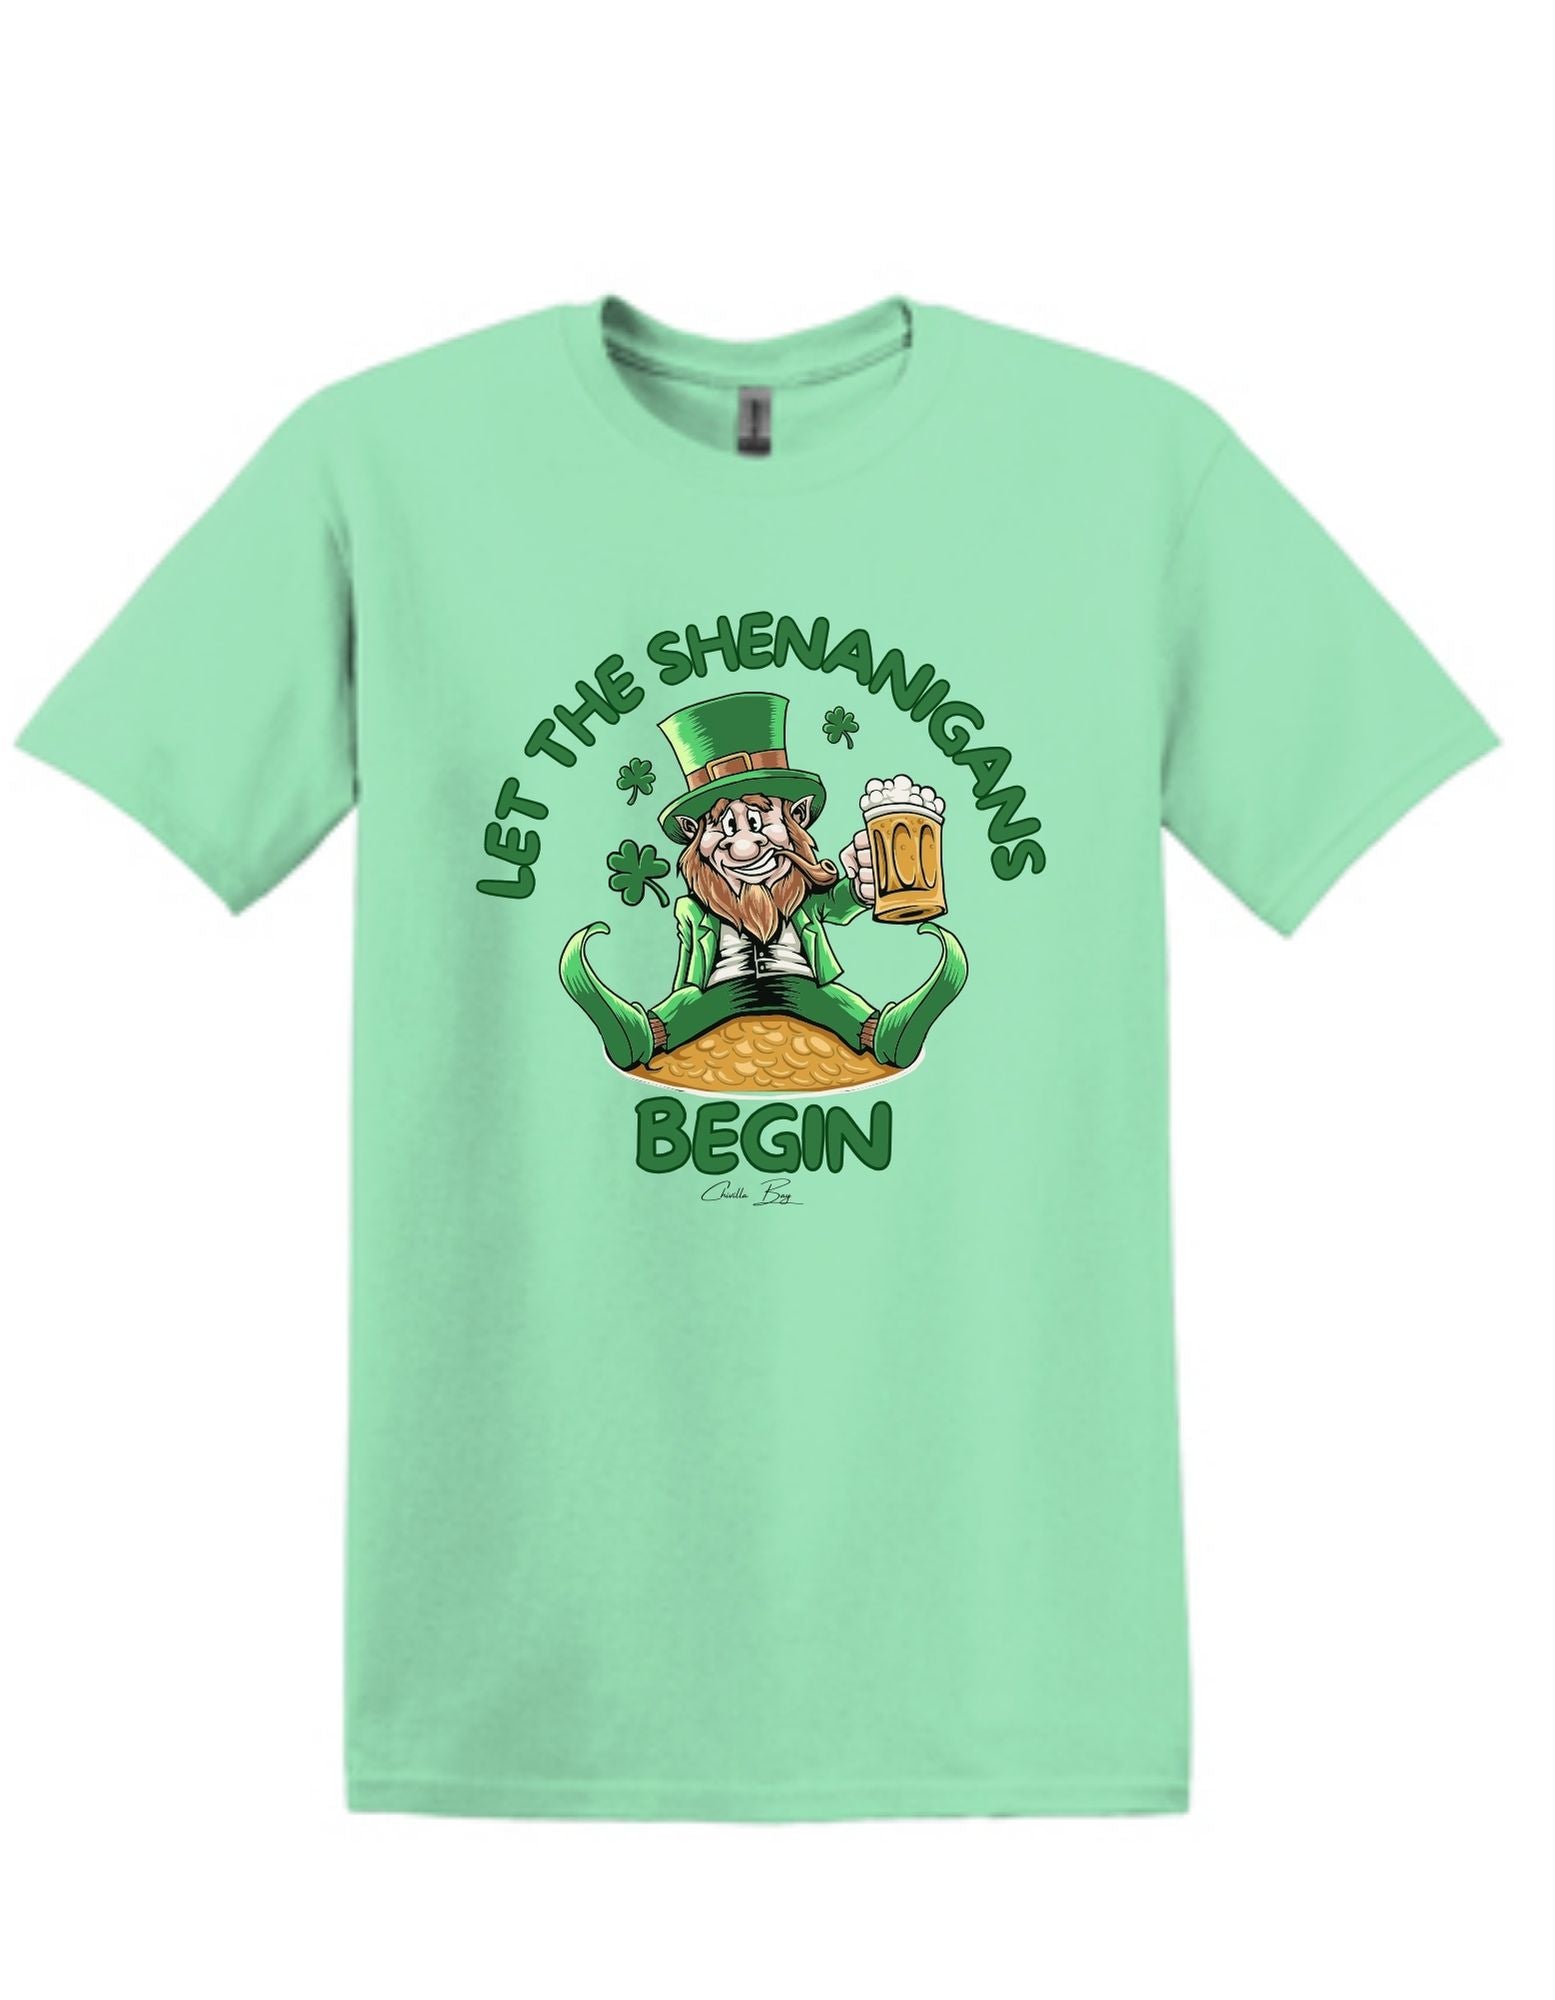 St. Patrick's Day 'Let the Shenanigans Begin' T-shirt with a full-color leprechaun graphic, available in black, mint, white or natural colors, direct-to-gartment printed on soft cotton tees in Aberdee, South Dakota.